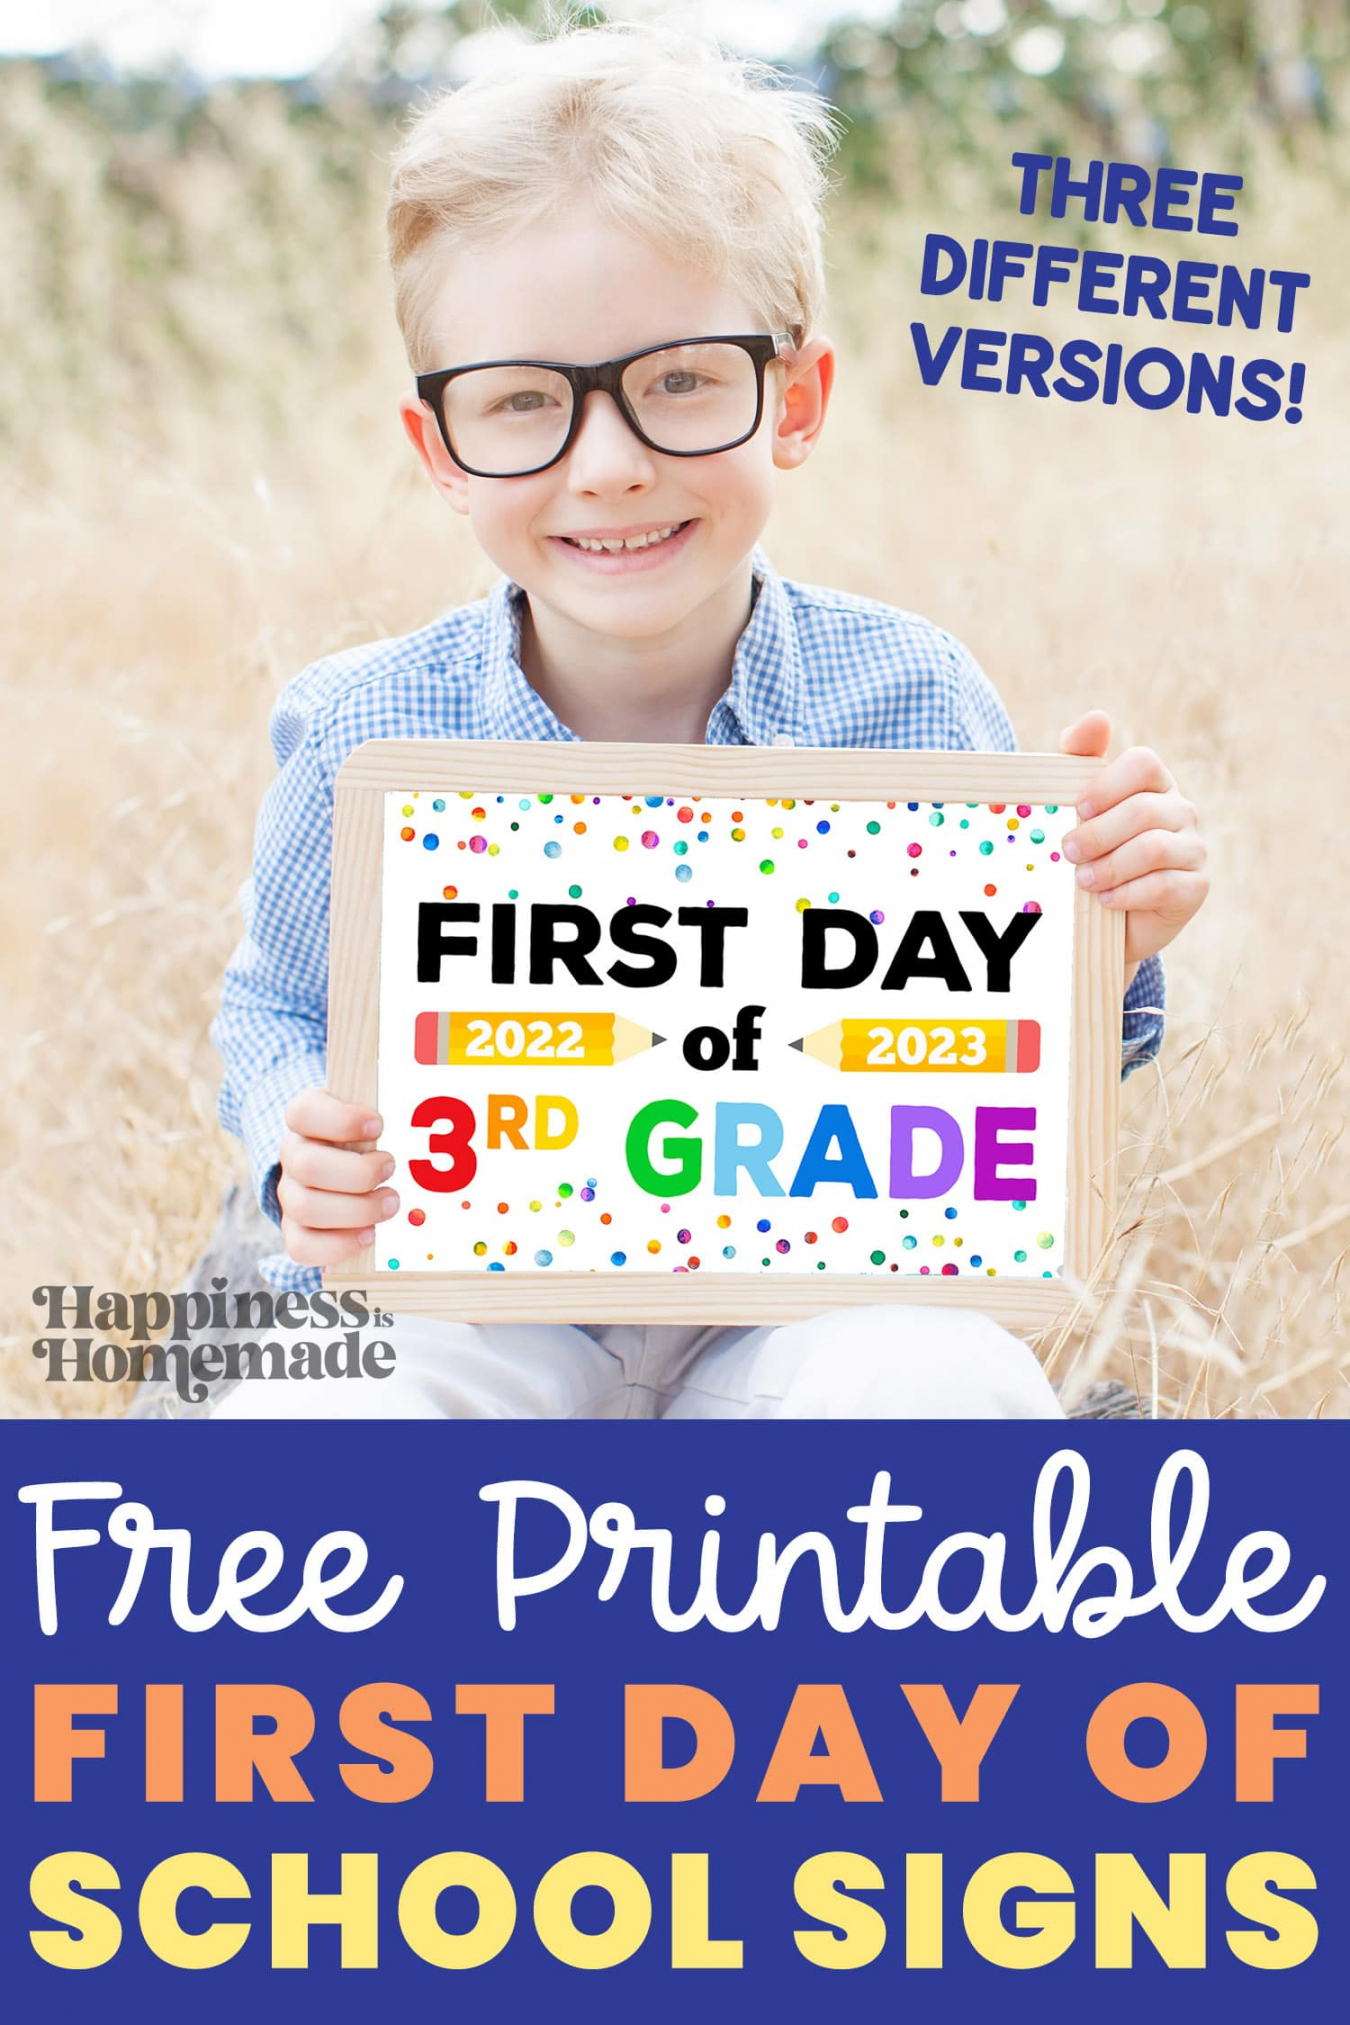 Free Printable First Day of School Signs - - Happiness is  - FREE Printables - Free Printable First Day Of School Sign